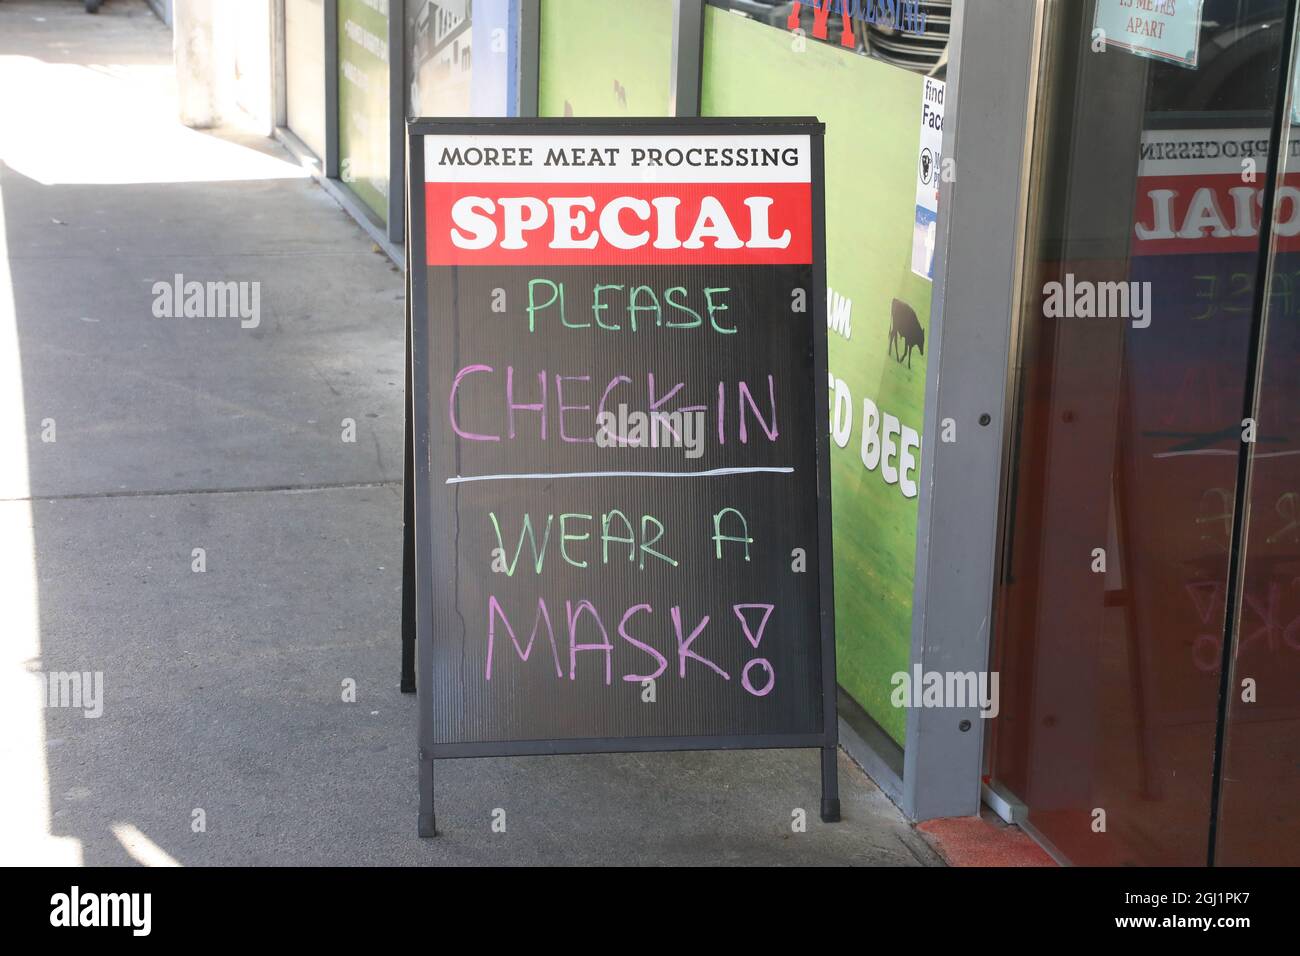 Sydney, Australia. 8th September 2021. Covid 19 please check-in wear a mask! Sign at Moree Meat Processing, 1/22 George St, North Strathfield NSW 2137. Credit: Richard Milnes/Alamy Live News Stock Photo